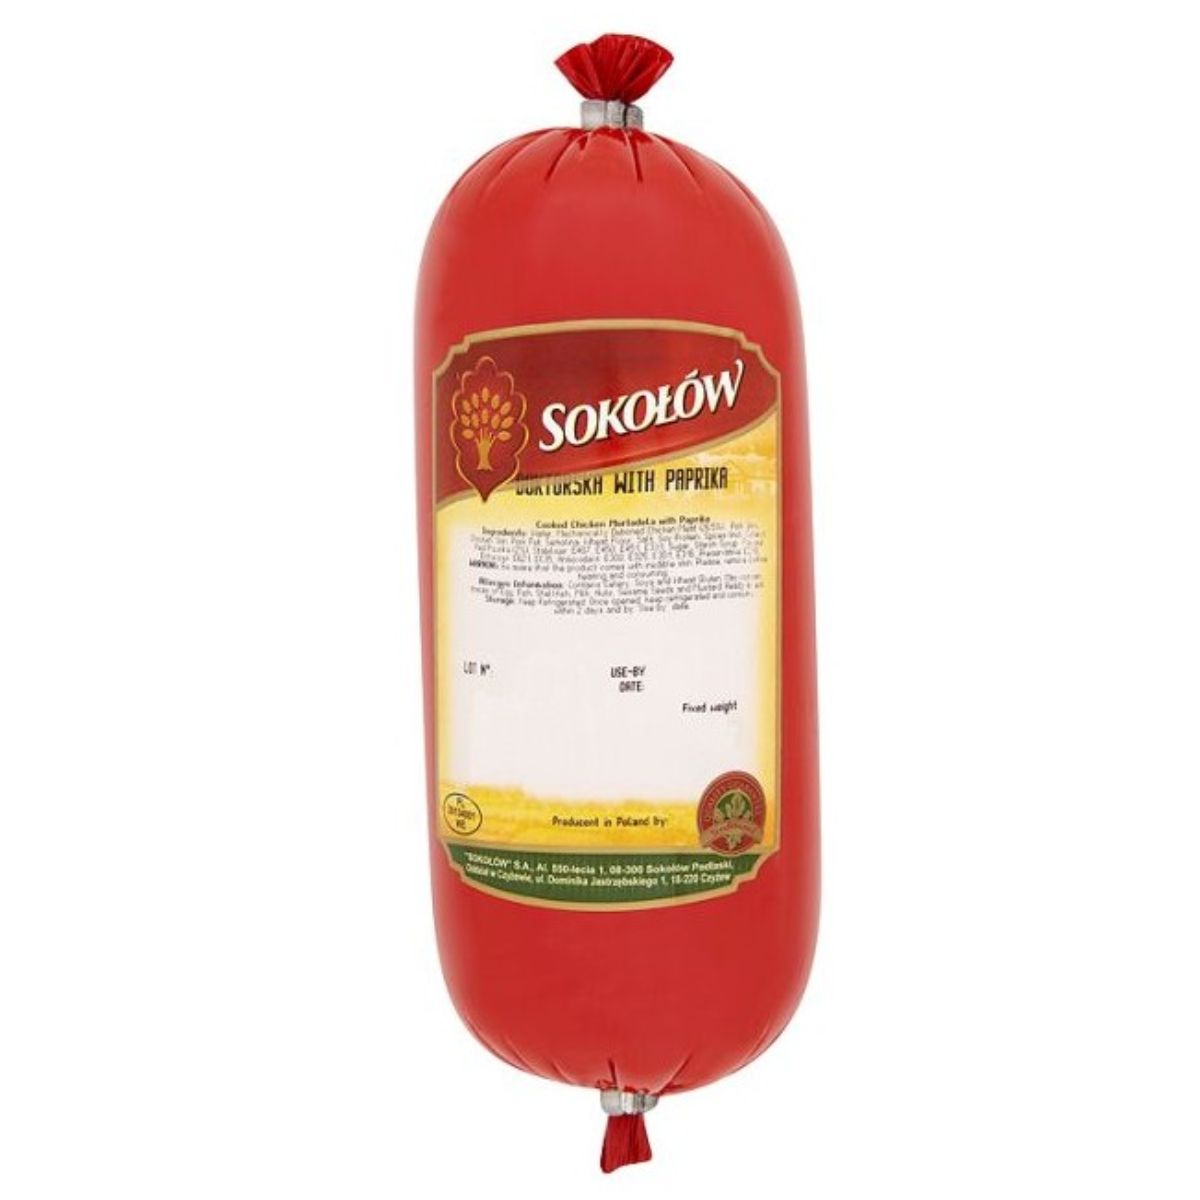 A red package of Sokolow - Mortadela with Paprika - 500g on a white background.